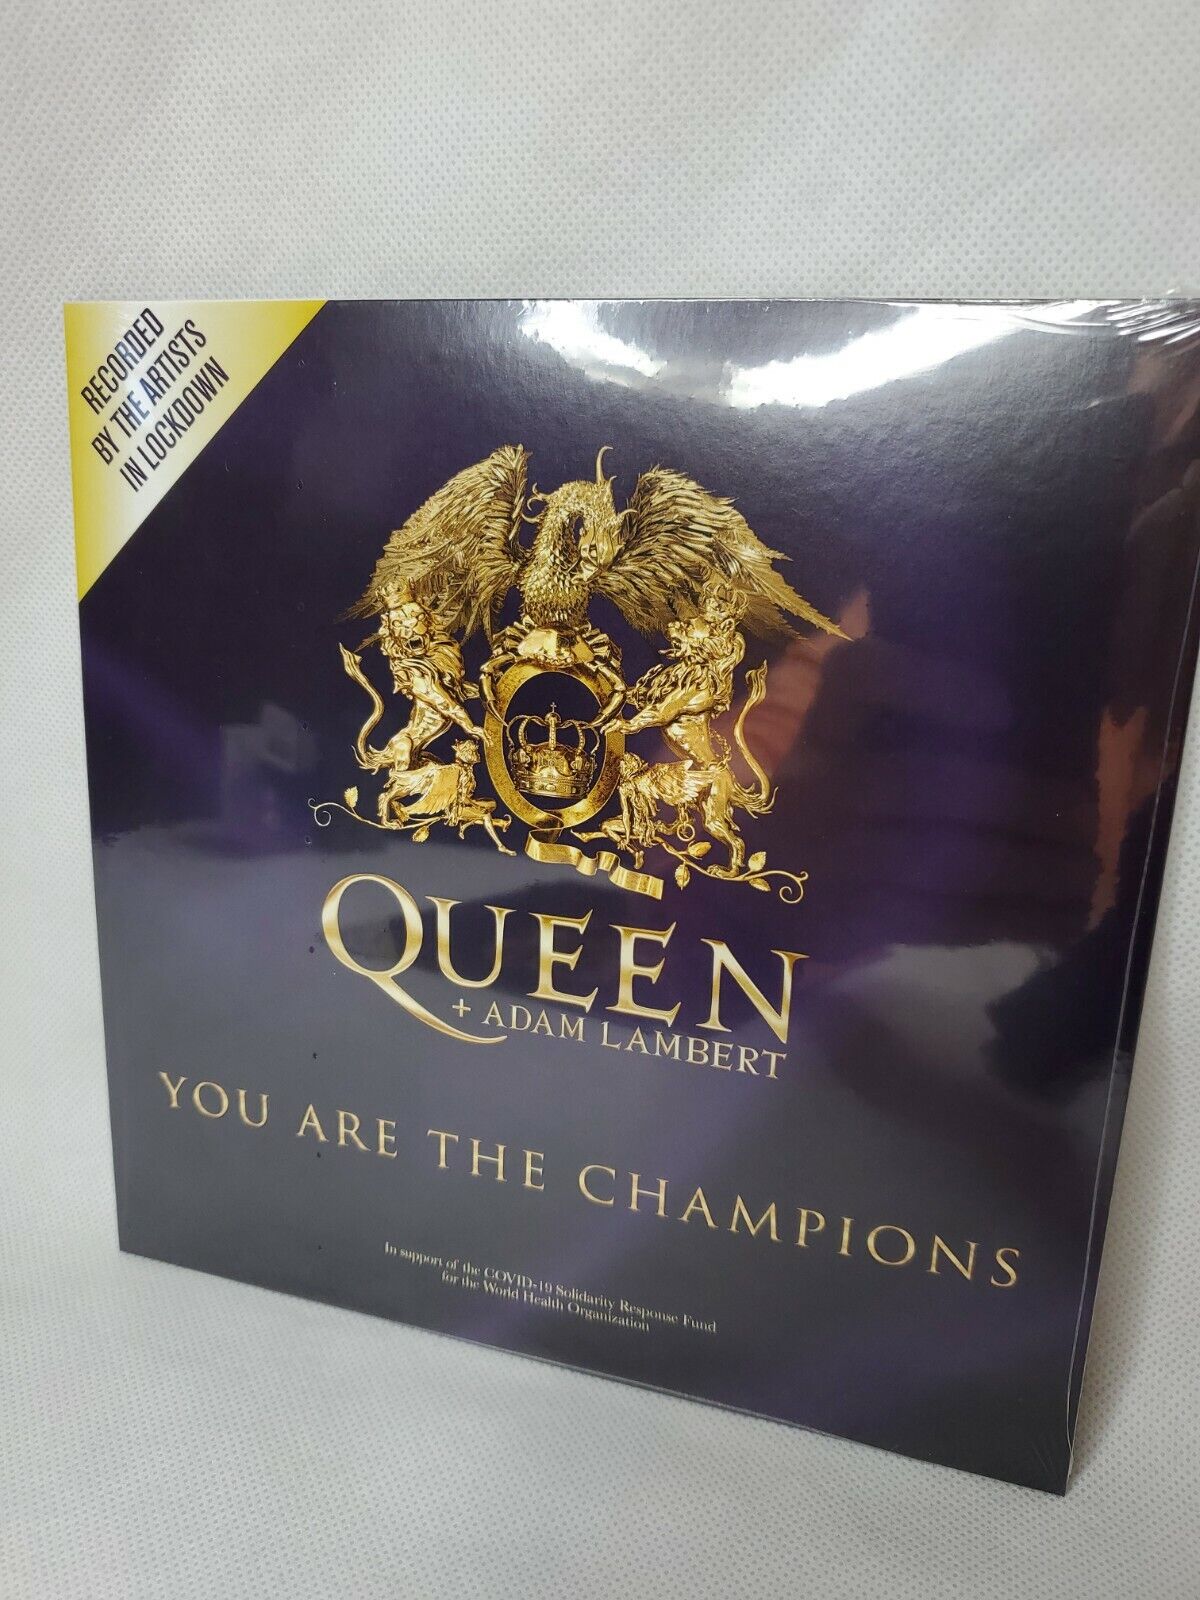 Queen Adam Lambert You are The Champions 7" NUMBERED 2326/3000 Vinyl Record EP